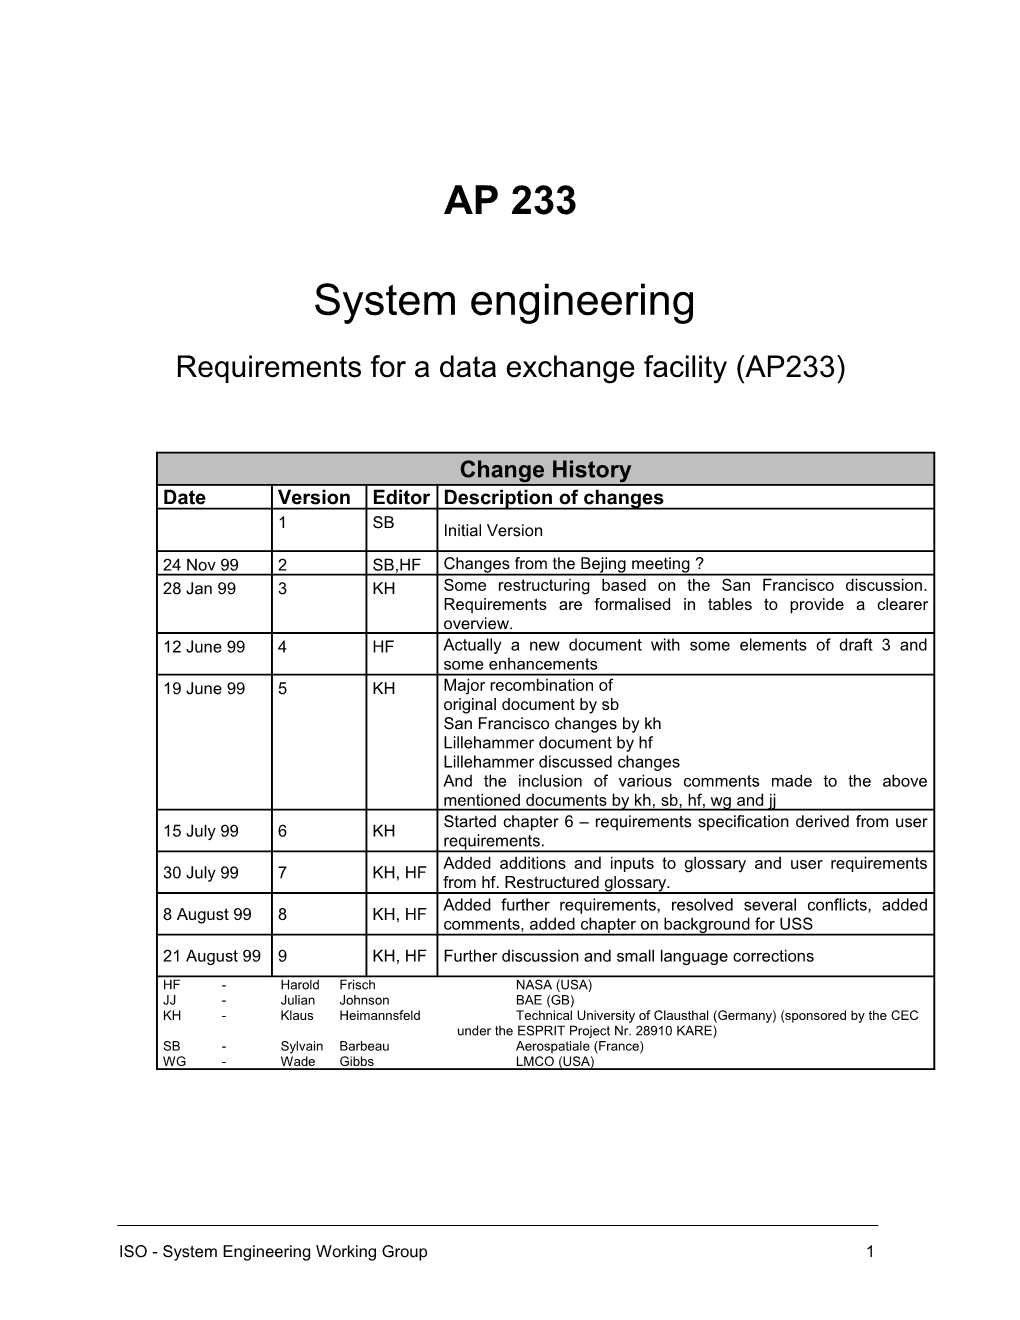 System Engineering Requirements for a Data Exchange Facility (AP233